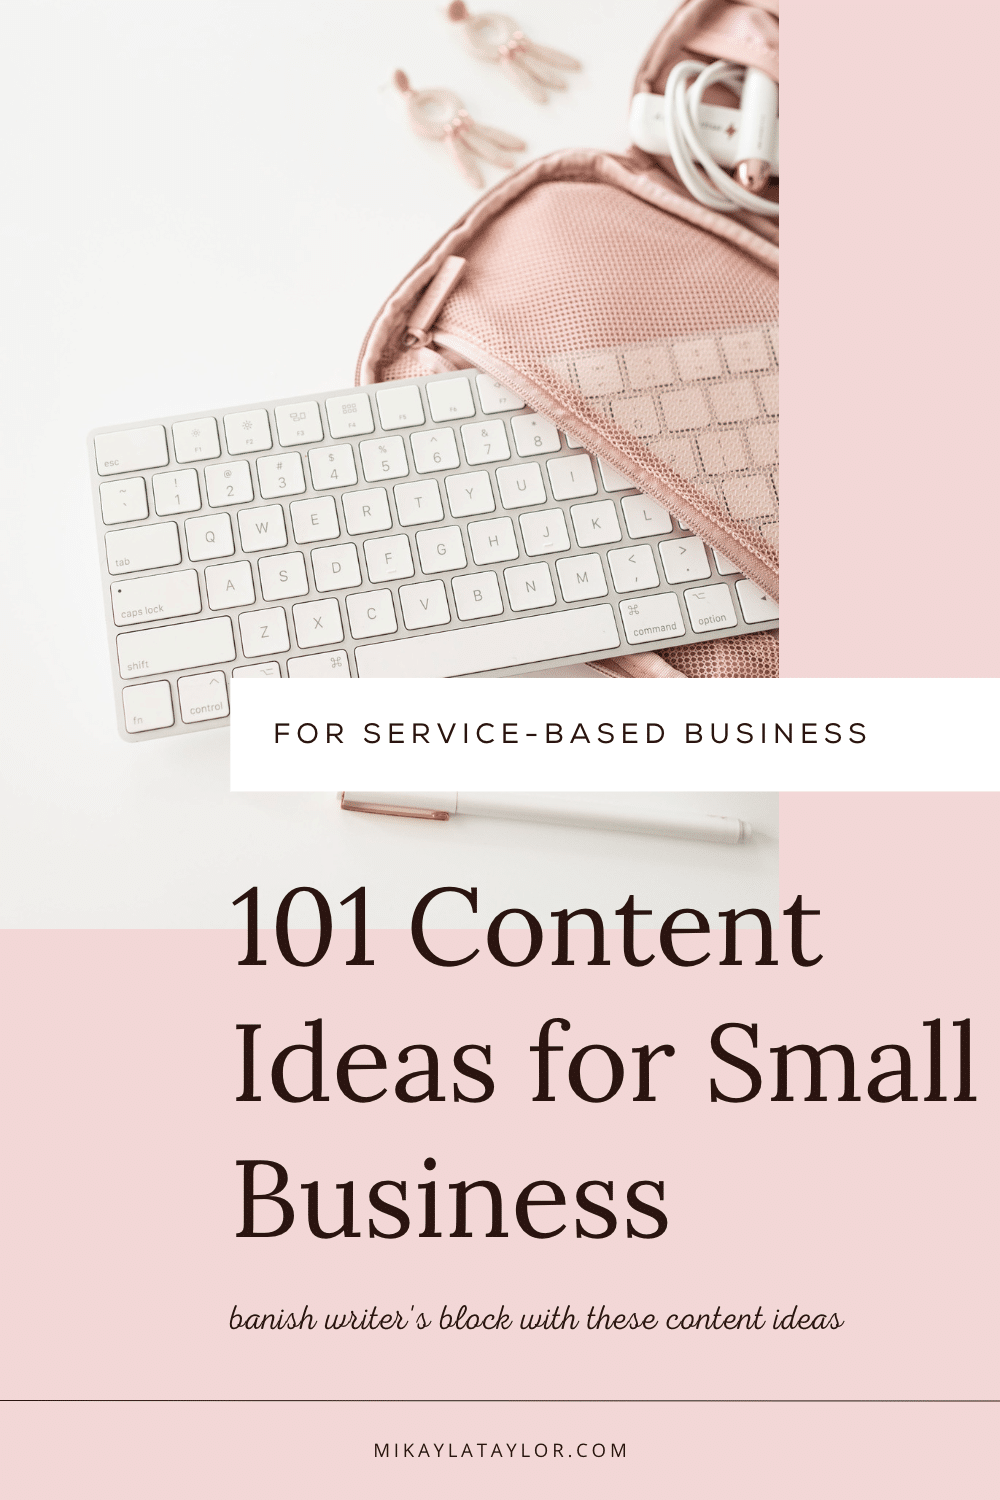 101 Content Ideas for Small Business Service Providers Mikayla Taylor Pinterest